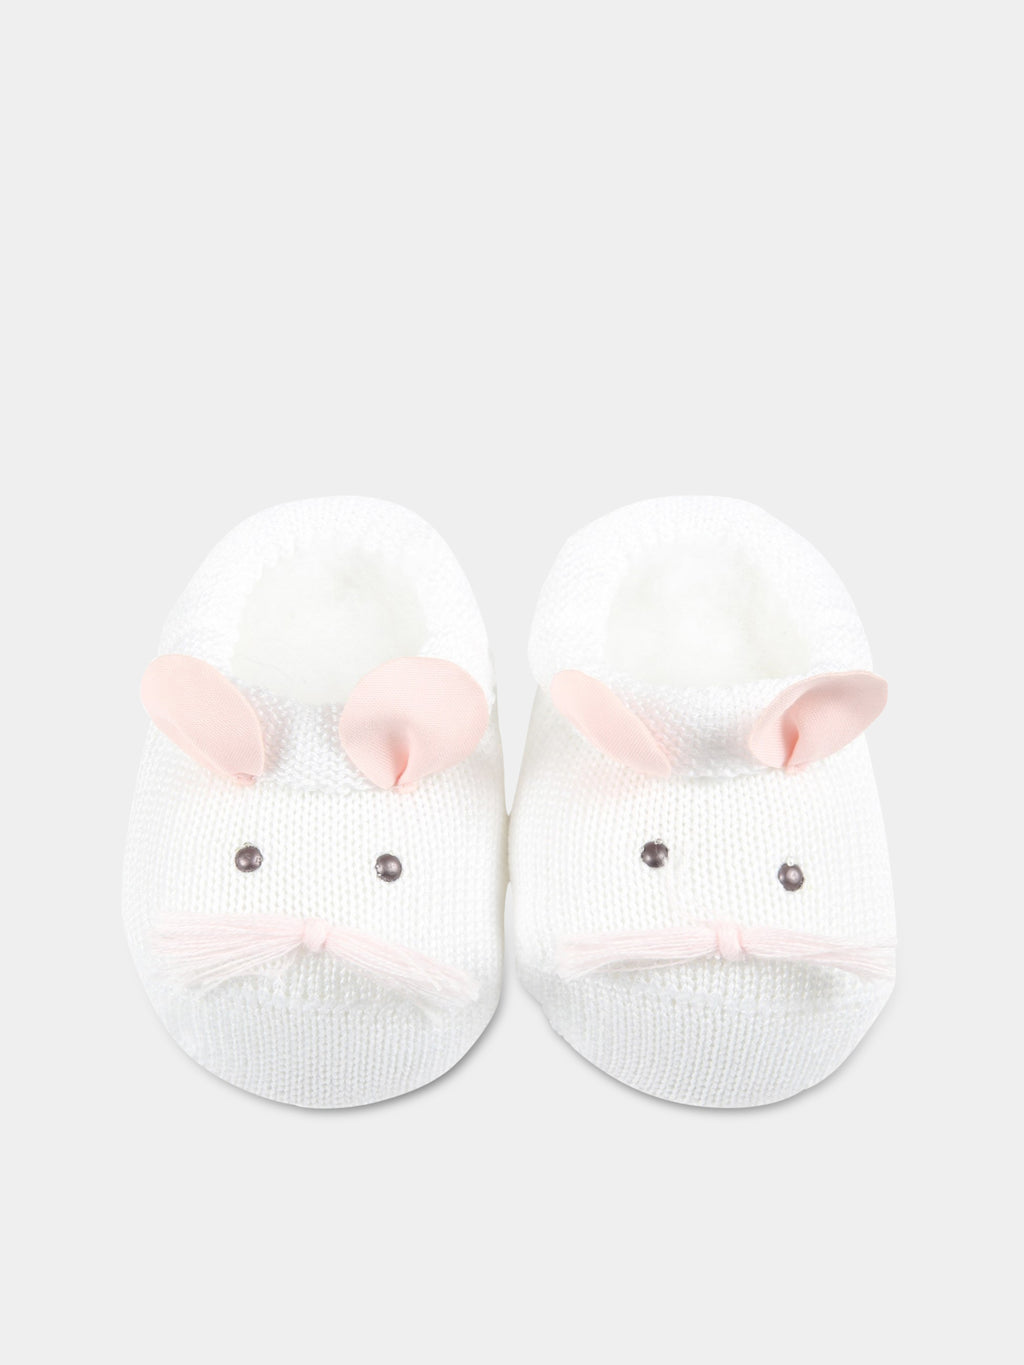 White baby-bootee for baby girl